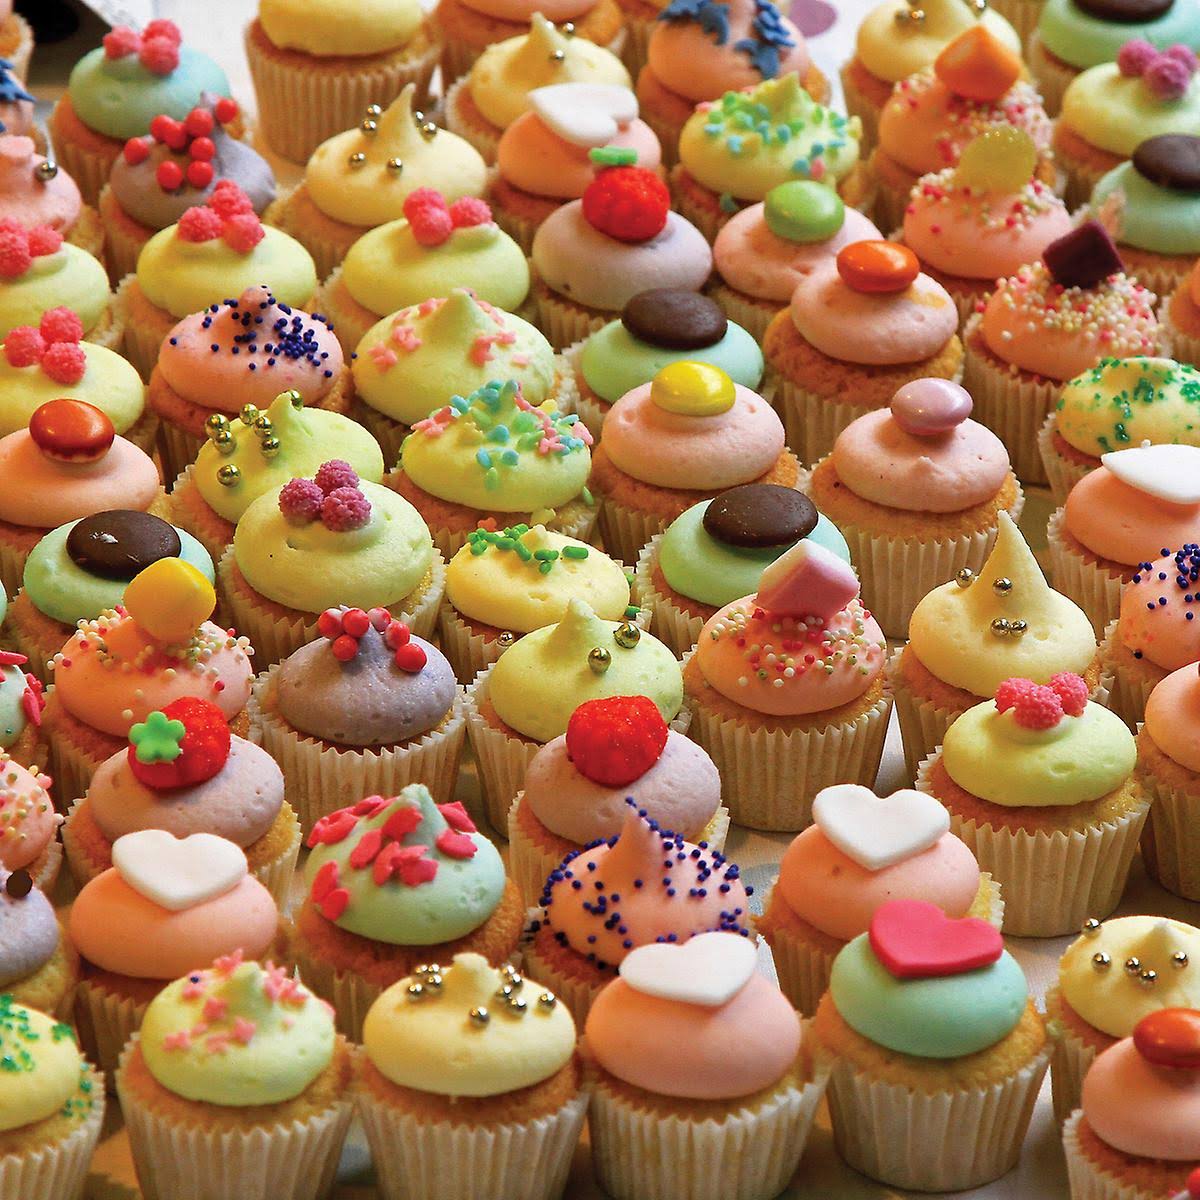 The World's Most Difficult Jigsaw Puzzle - Killer Cupcakes